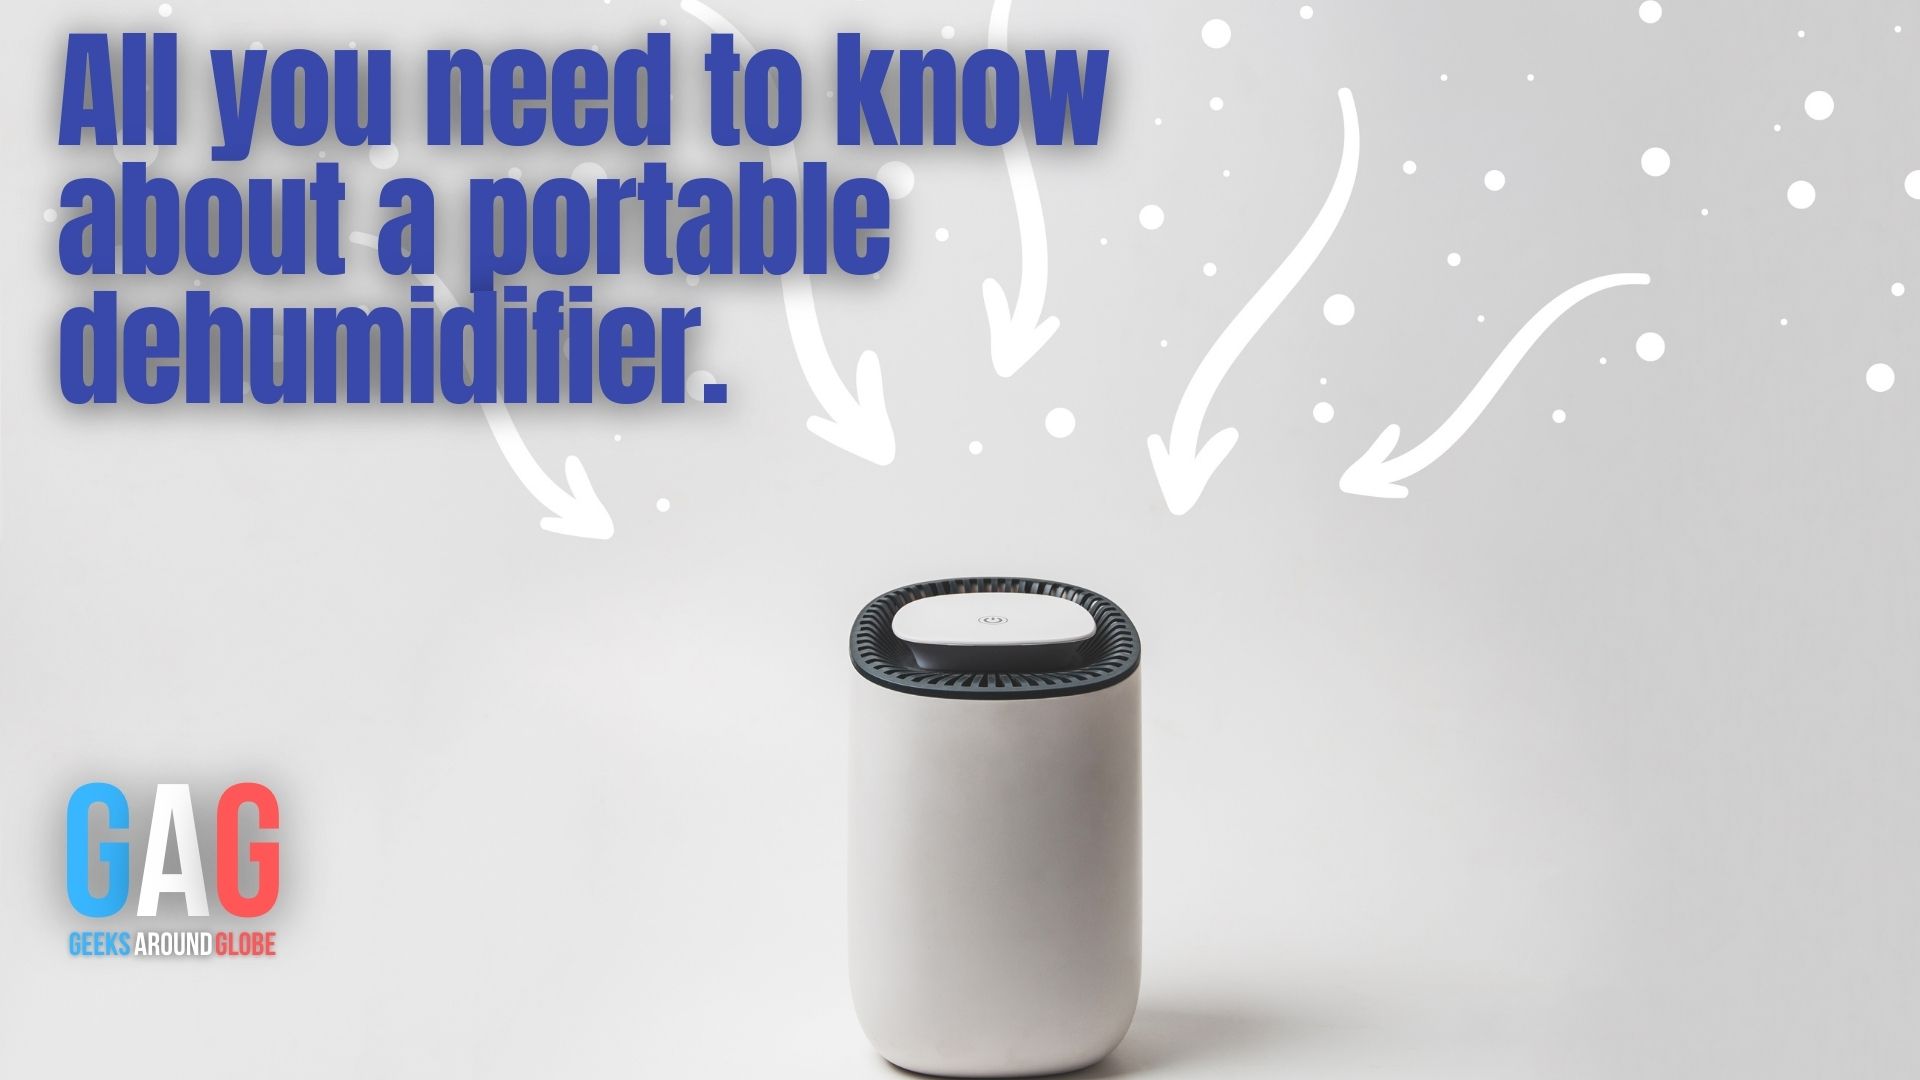 Let’s know about a portable dehumidifier.